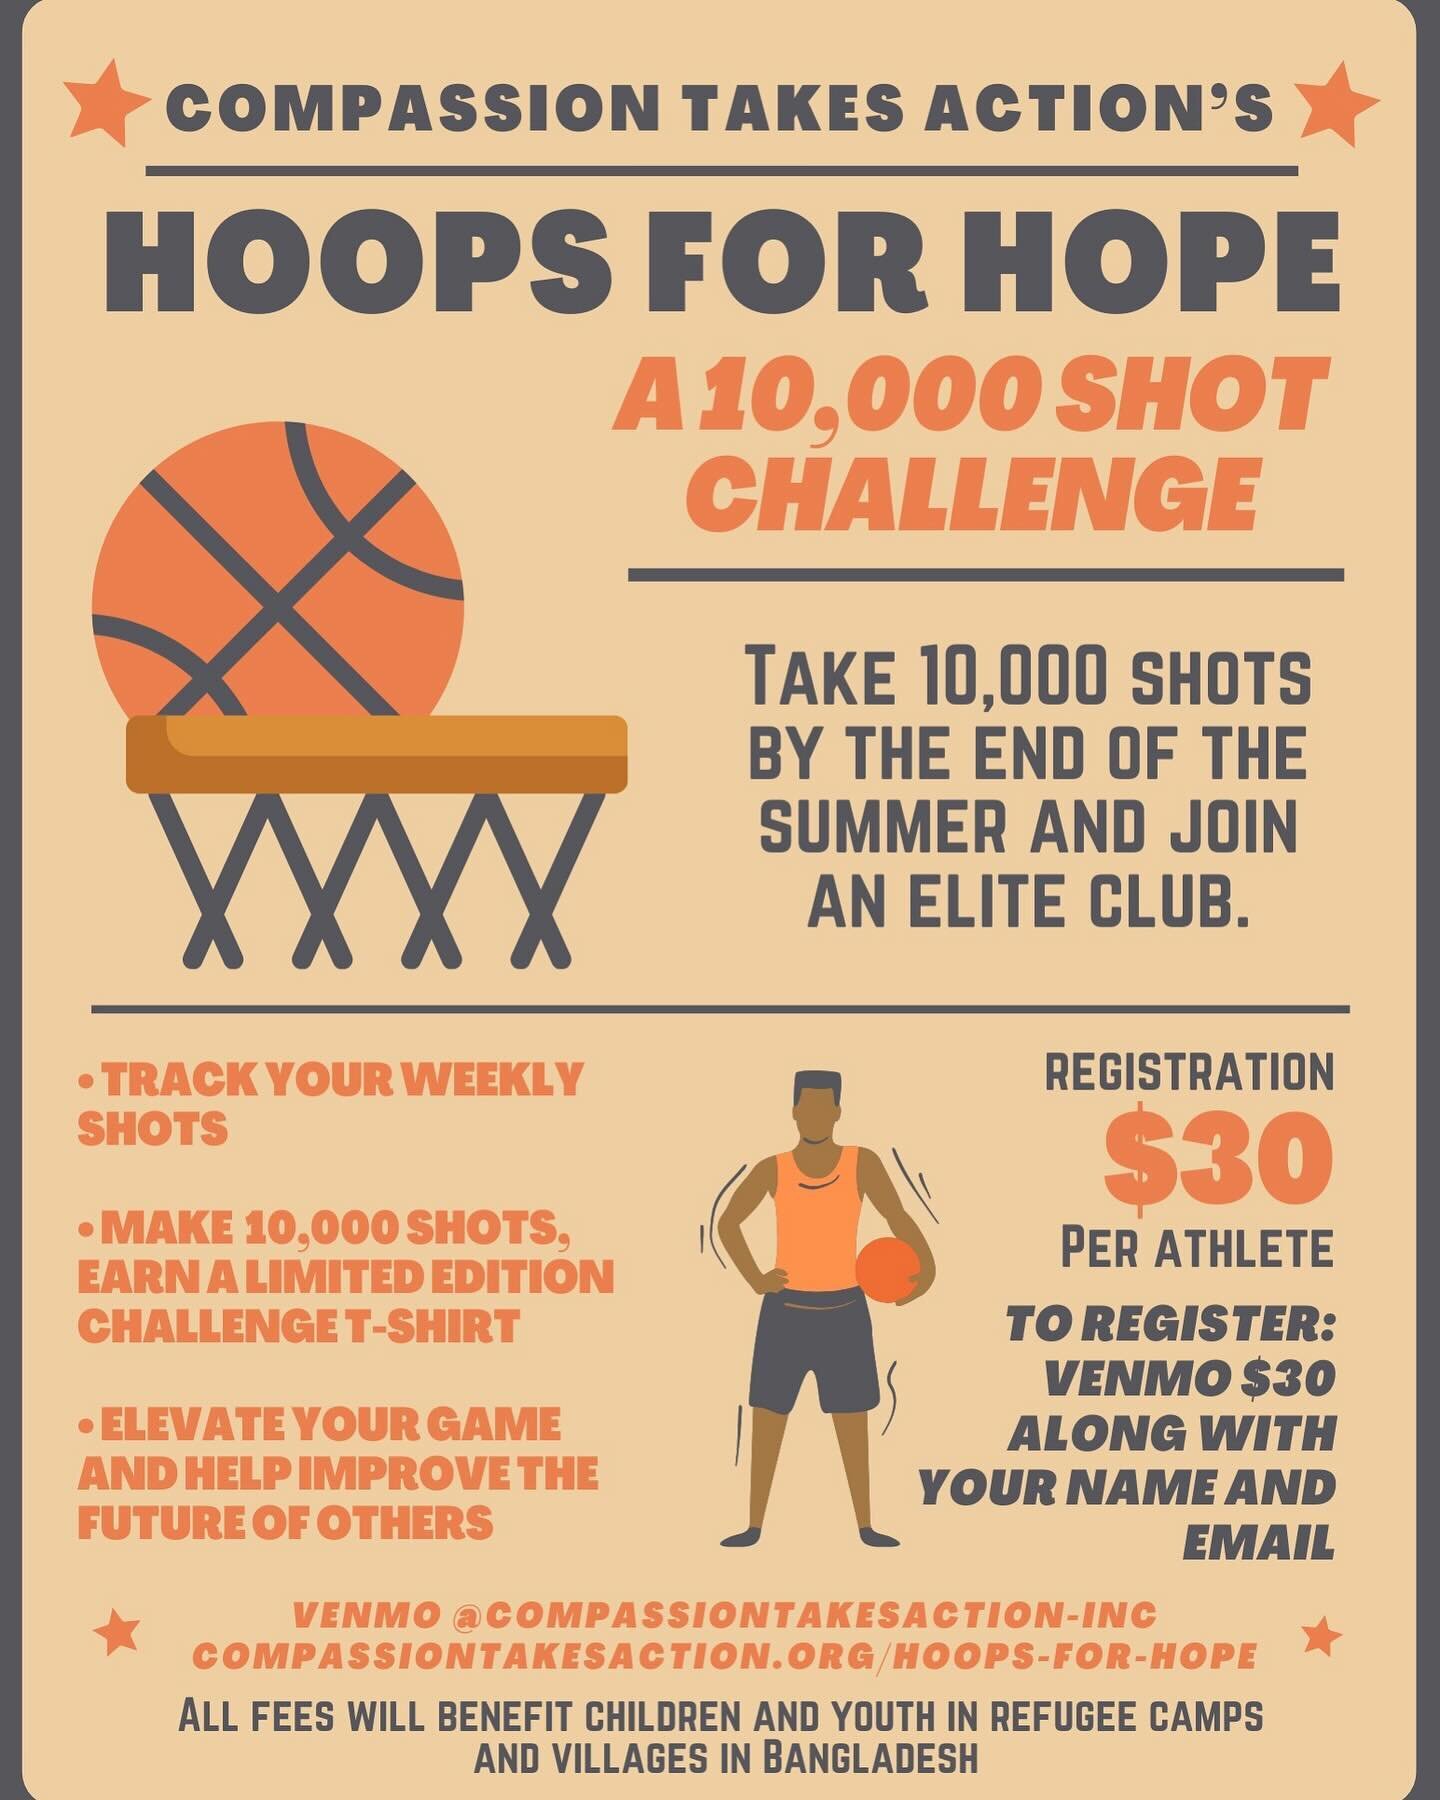 Hoops for Hope 10K shot challenge. Get an early start now and finish by the end of summer to get your shirt. We would love to have your children/teens participate. Three ways to join depending on what is easiest for you- 
1. Join on website at Compas